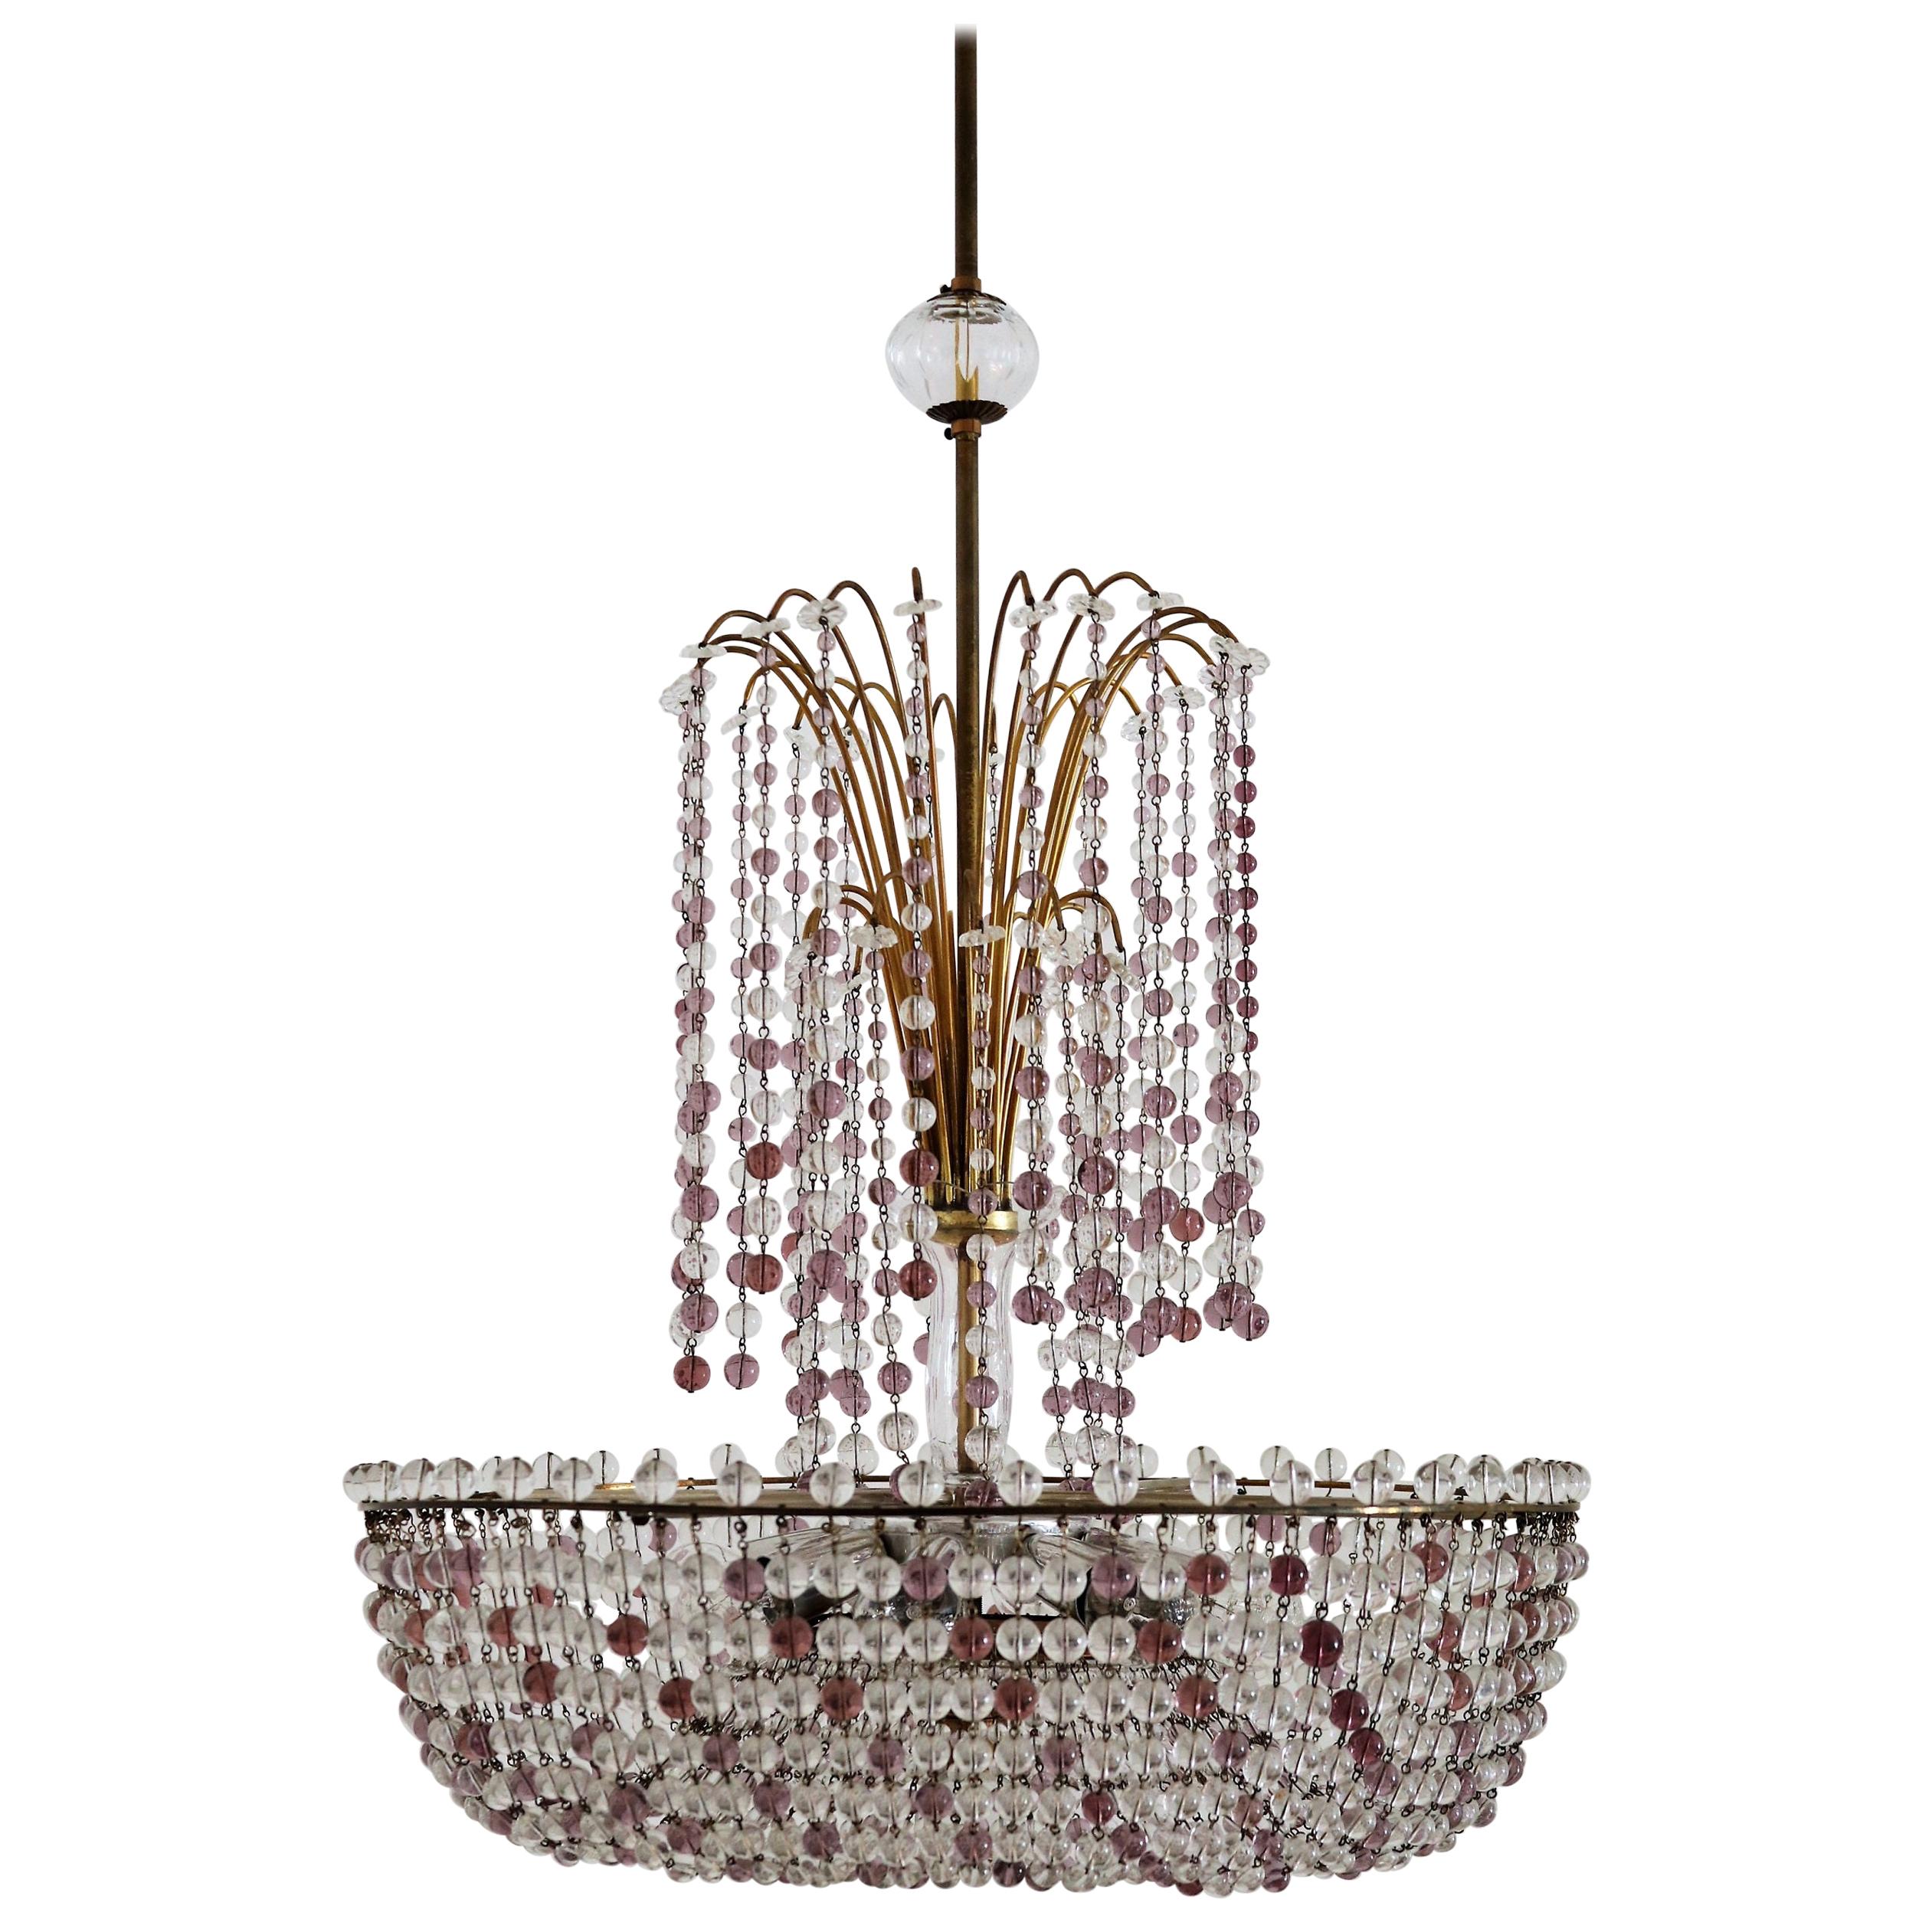 Italian Art Nouveau Handcrafted Murano Waterfall Chandelier in Crystal and Brass